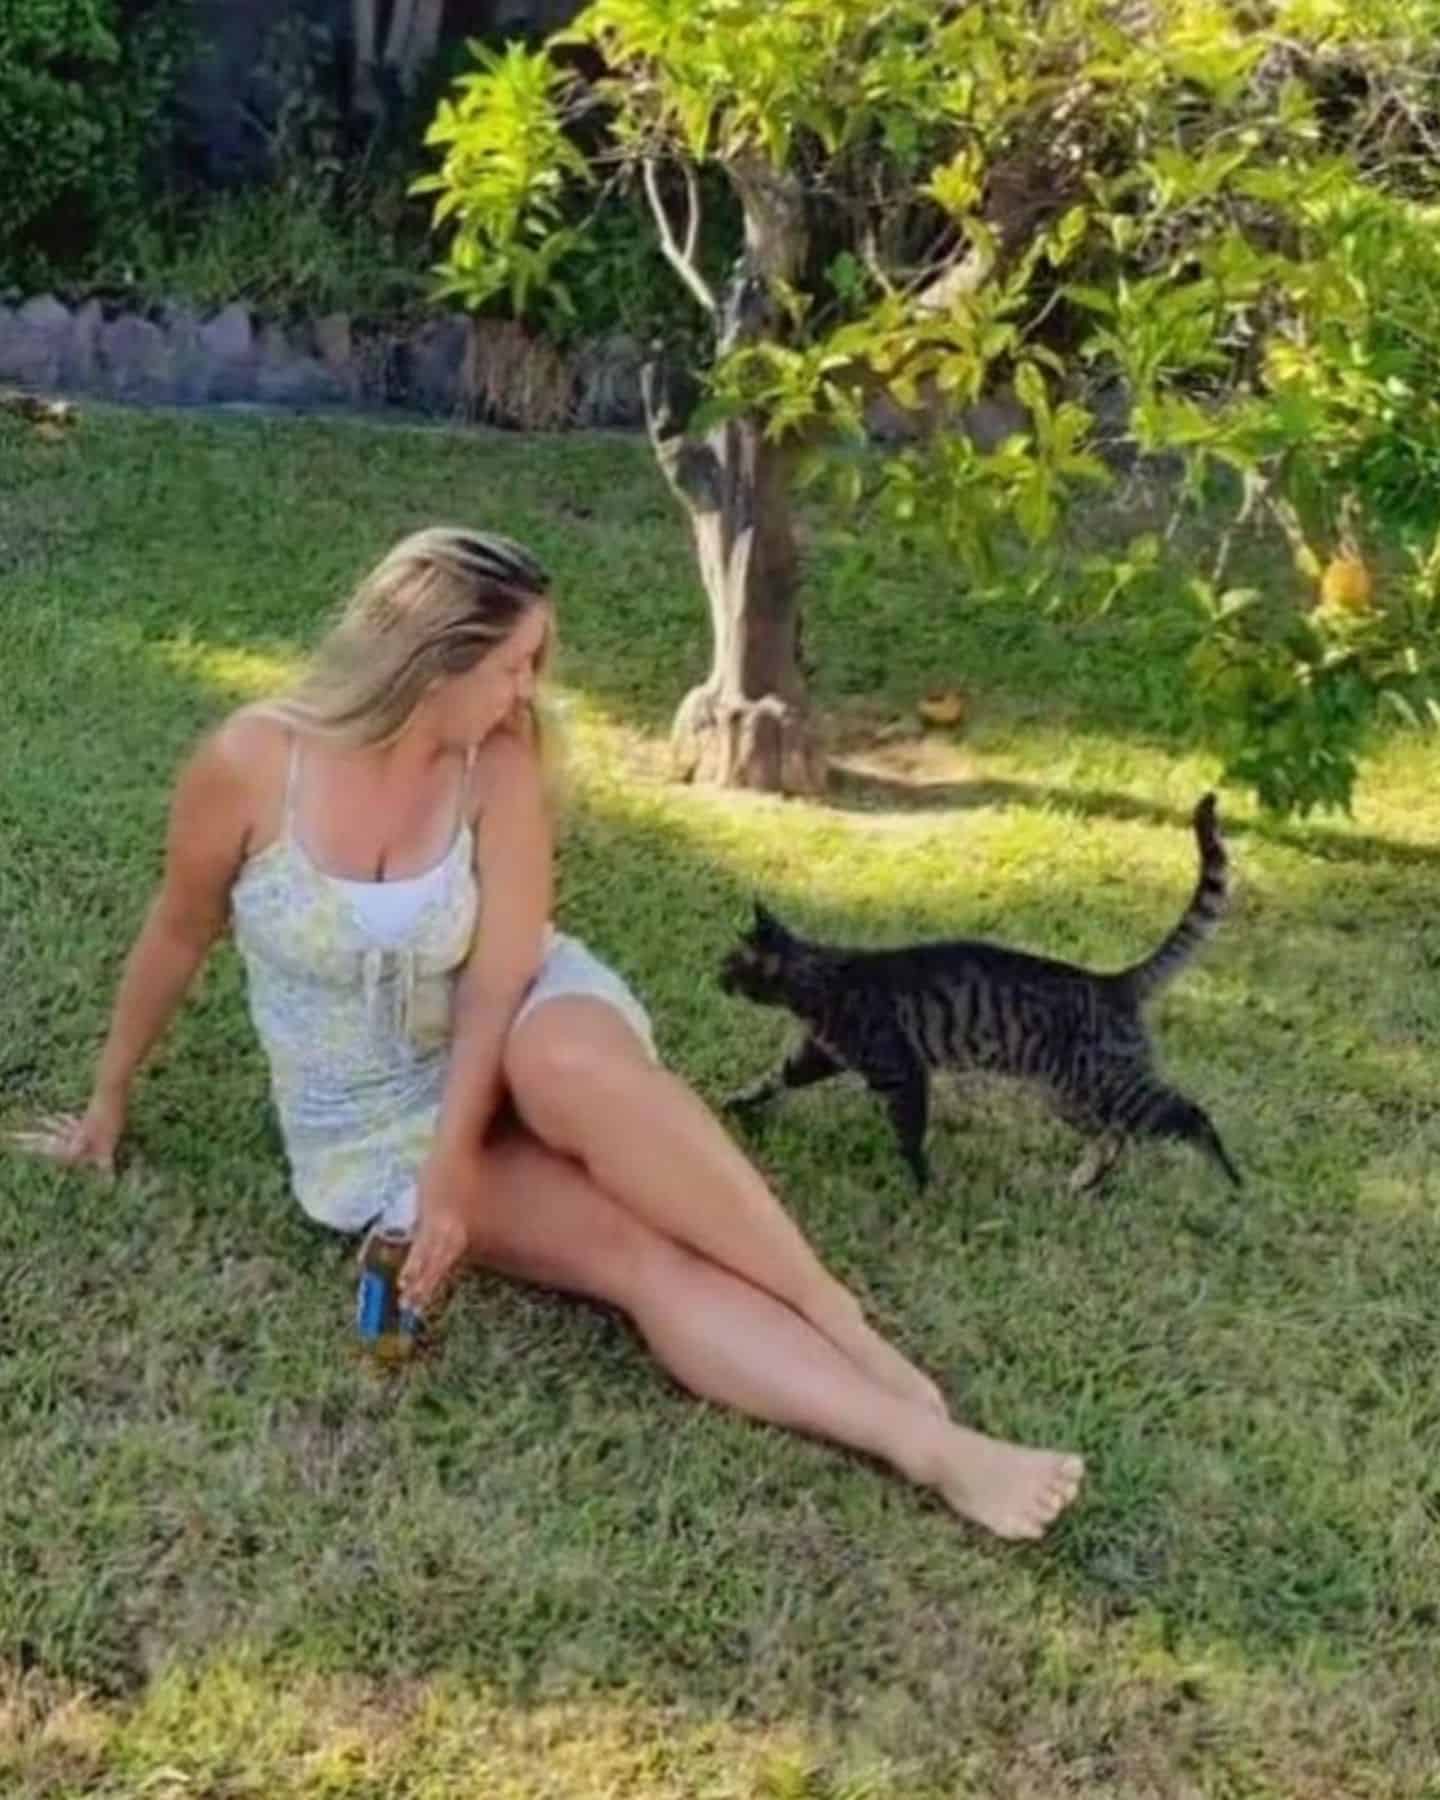 the cat approaches the girl sitting on the lawn